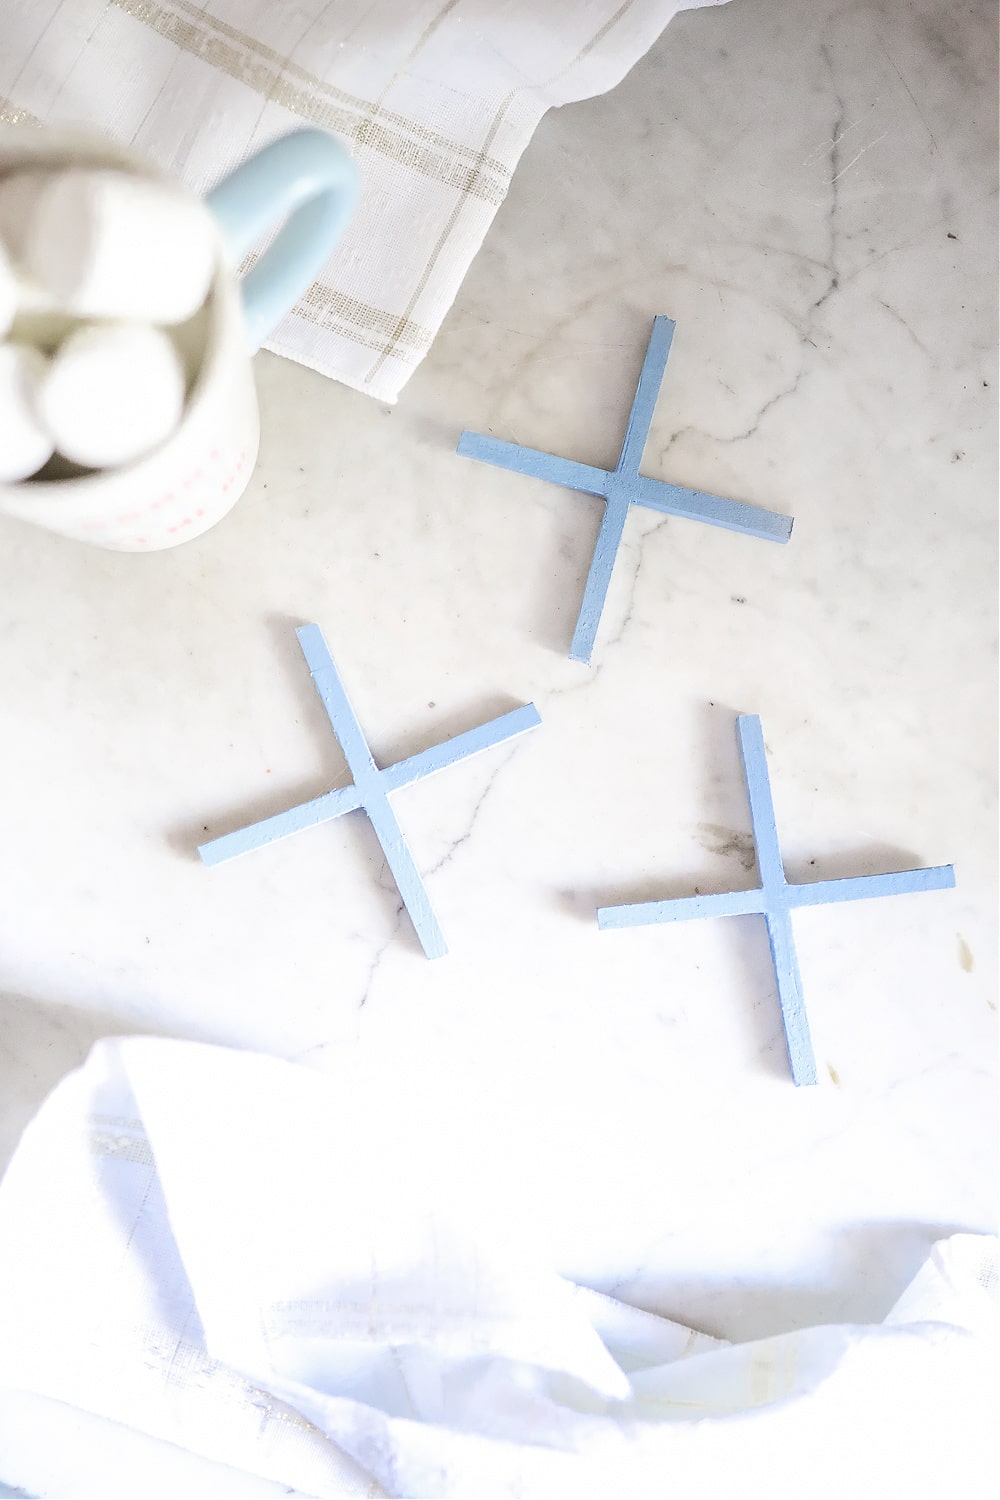 DIY blogger Stephanie Ziajka shows how to make your own DIY painted wood coasters with MakerX creative tools on Diary of a Debutante